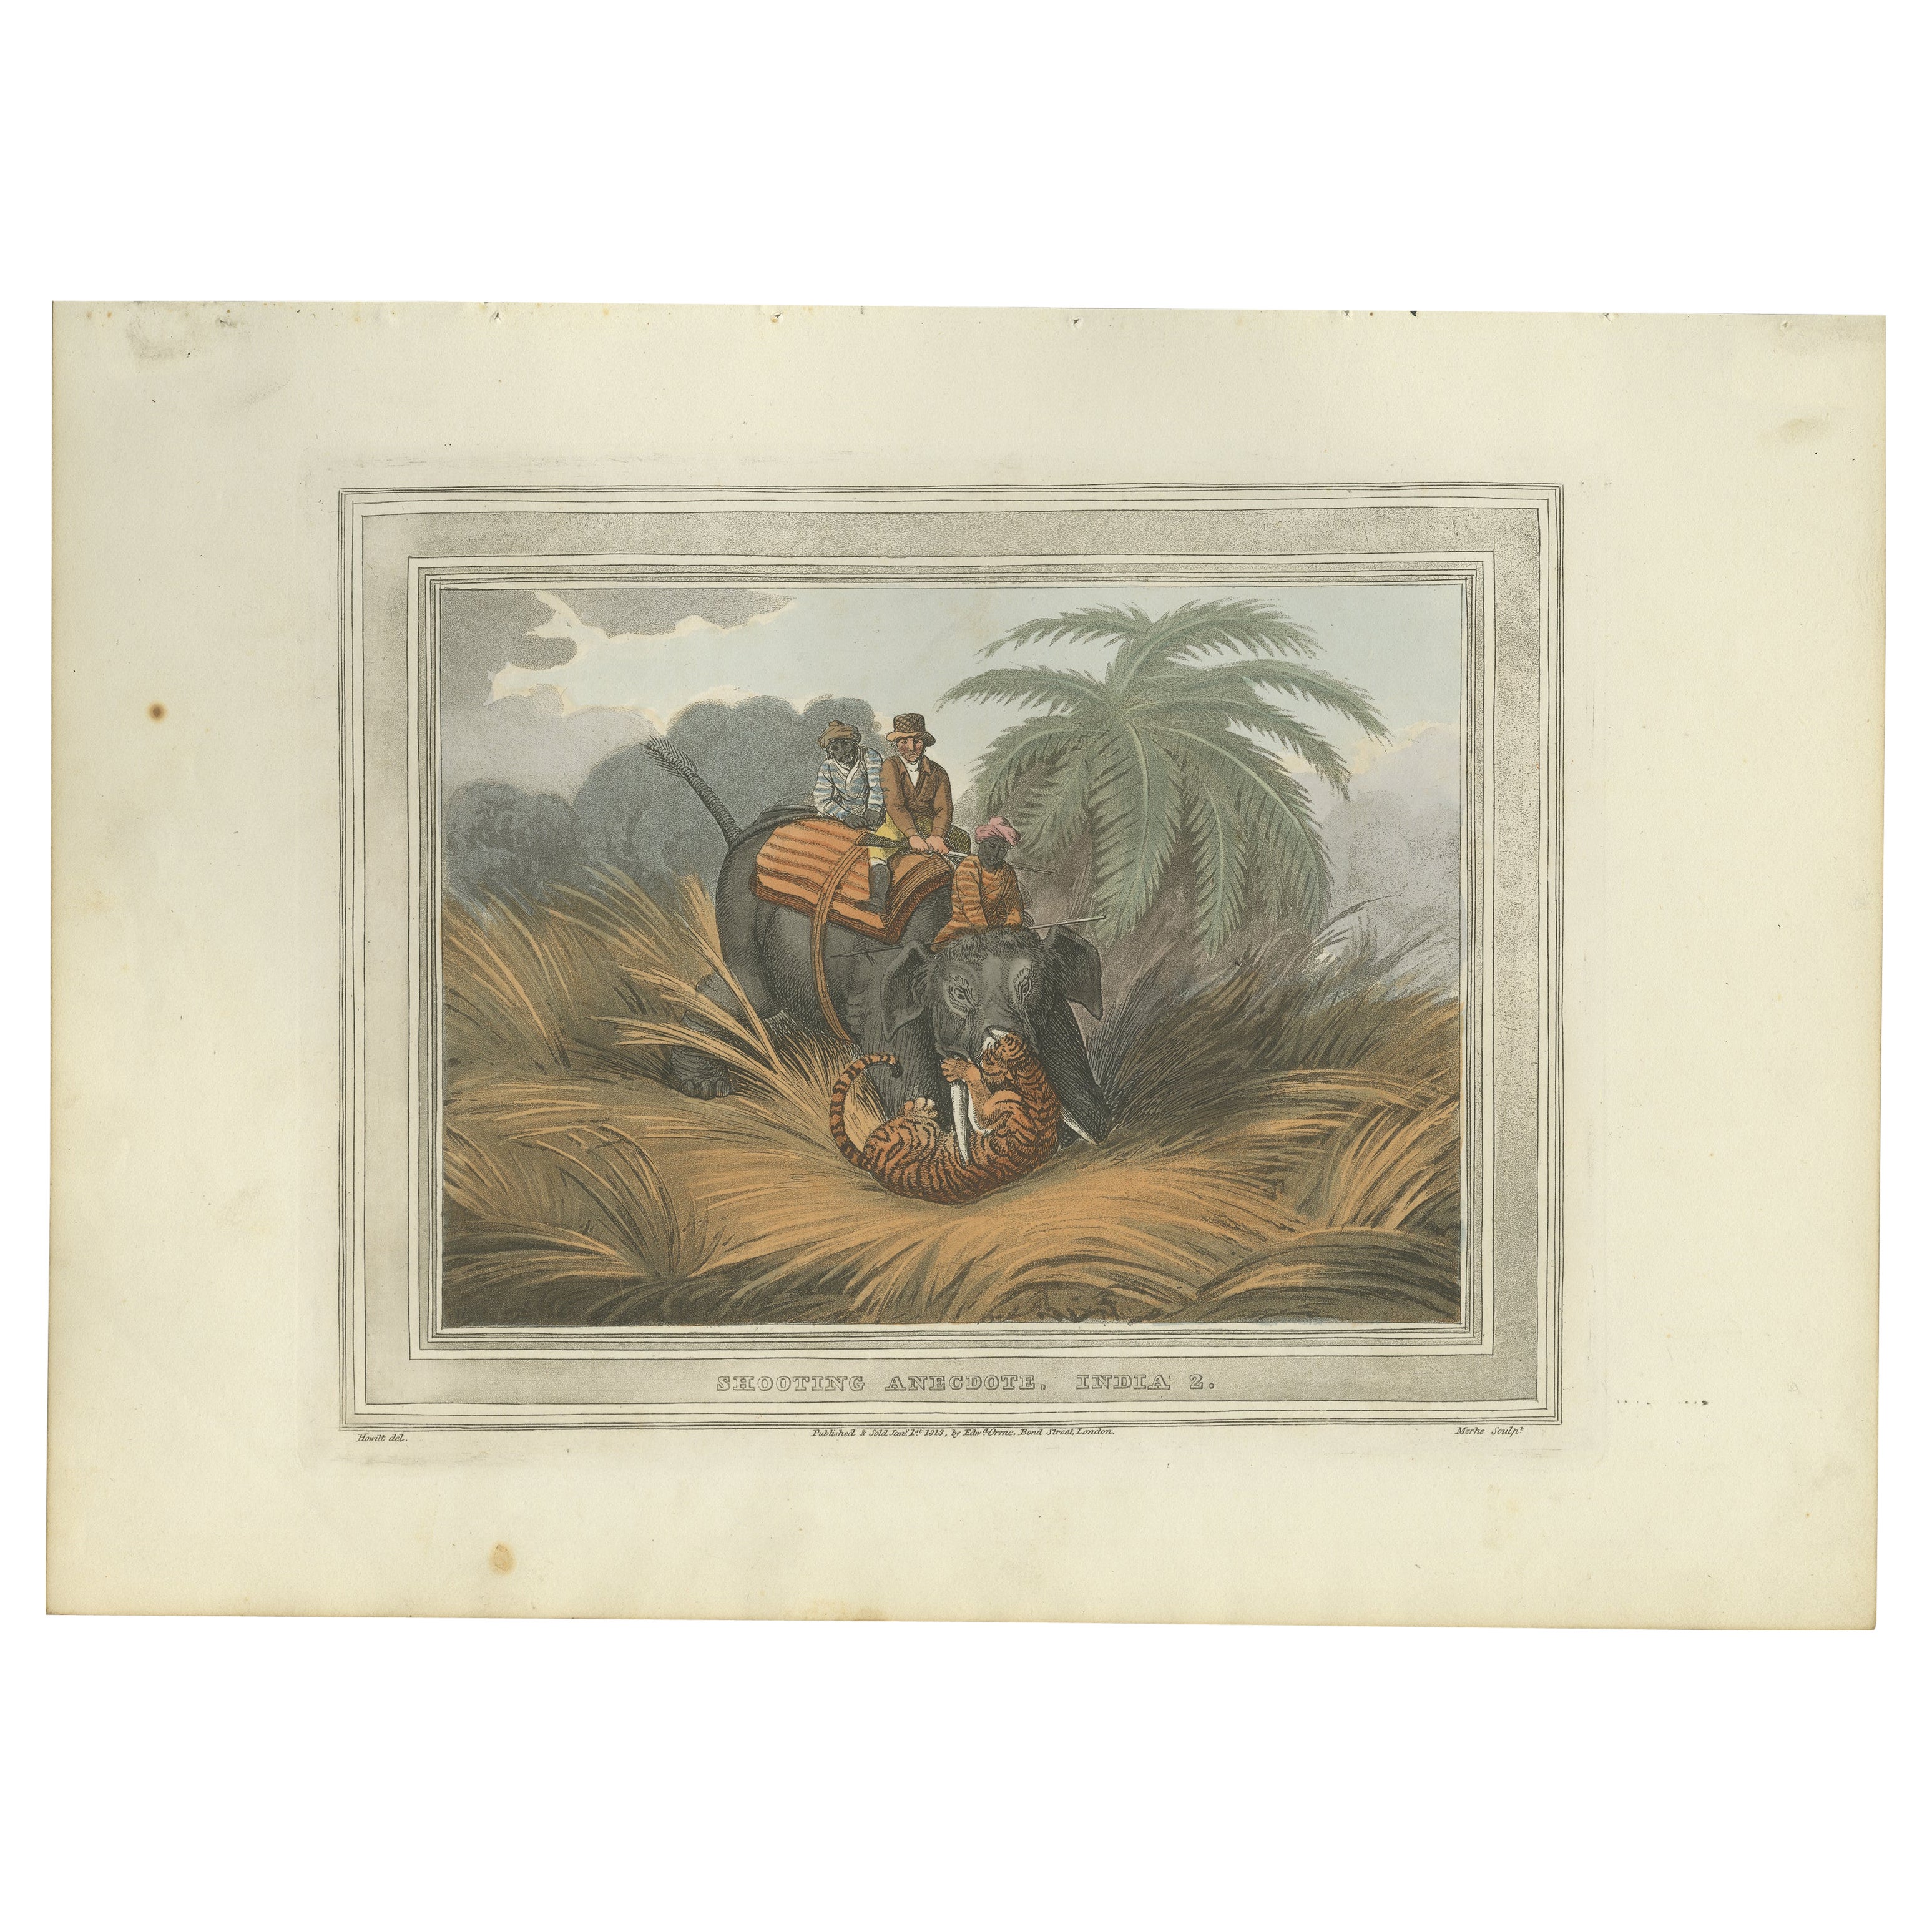 Set of four beautiful fine hand colored engravings, protected in acid free matting.

Titles:

1) Hog hunters in India going out no.1
2) Shooting anecdote, Indian 2
3) Hindoo elephant trap.
4) Hindoo method of taming elephants

Maker: Samuel